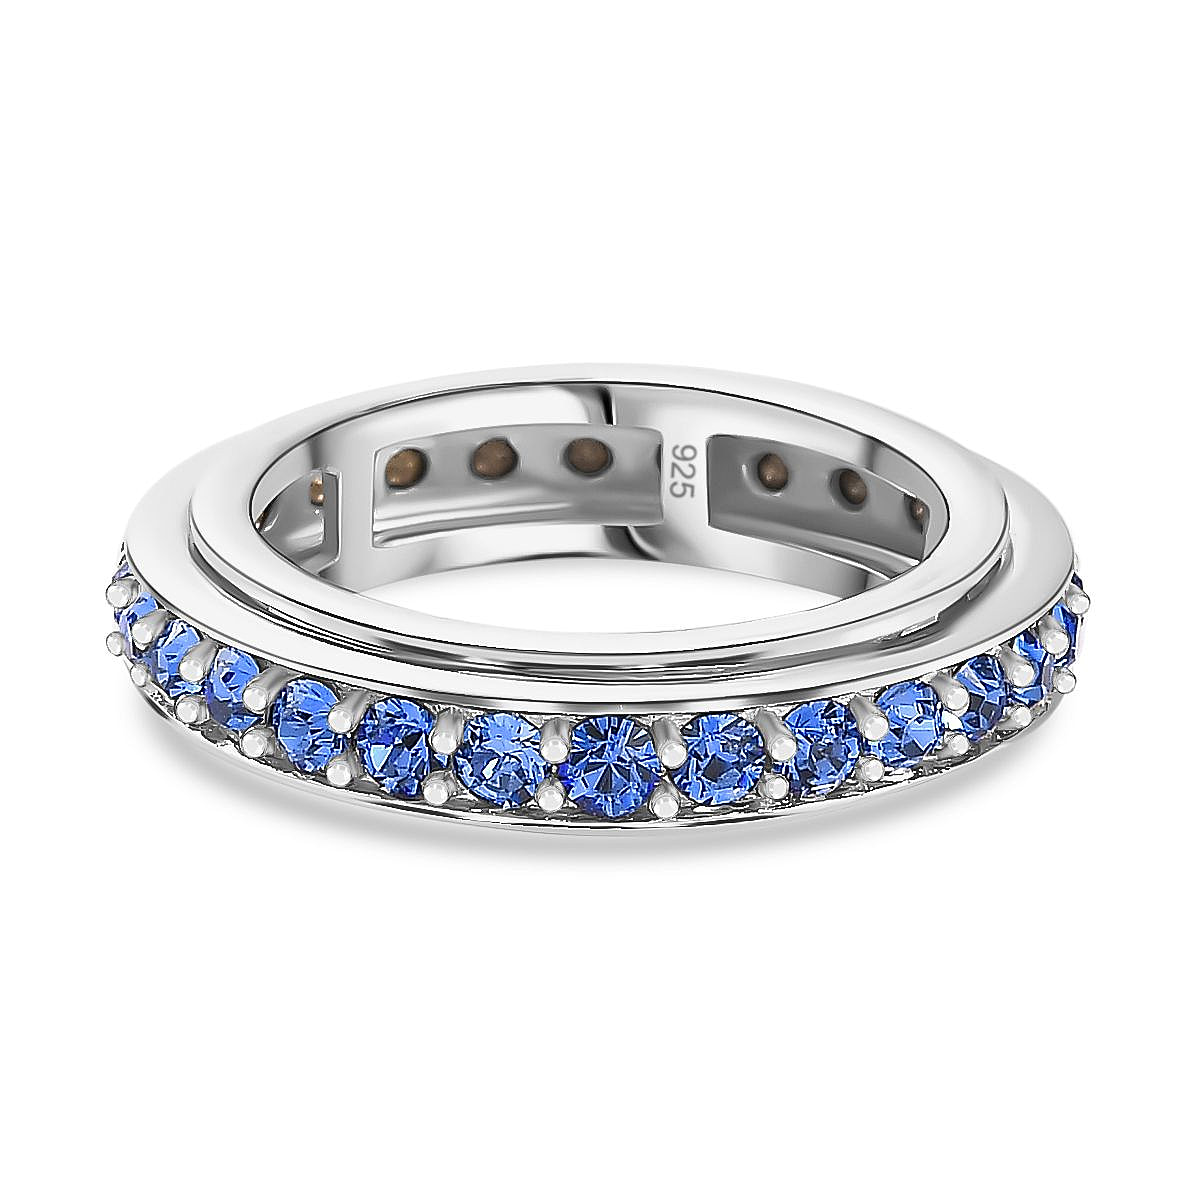 Sapphire Finest Crystal Band Ring in Platinum Overlay Sterling Silver